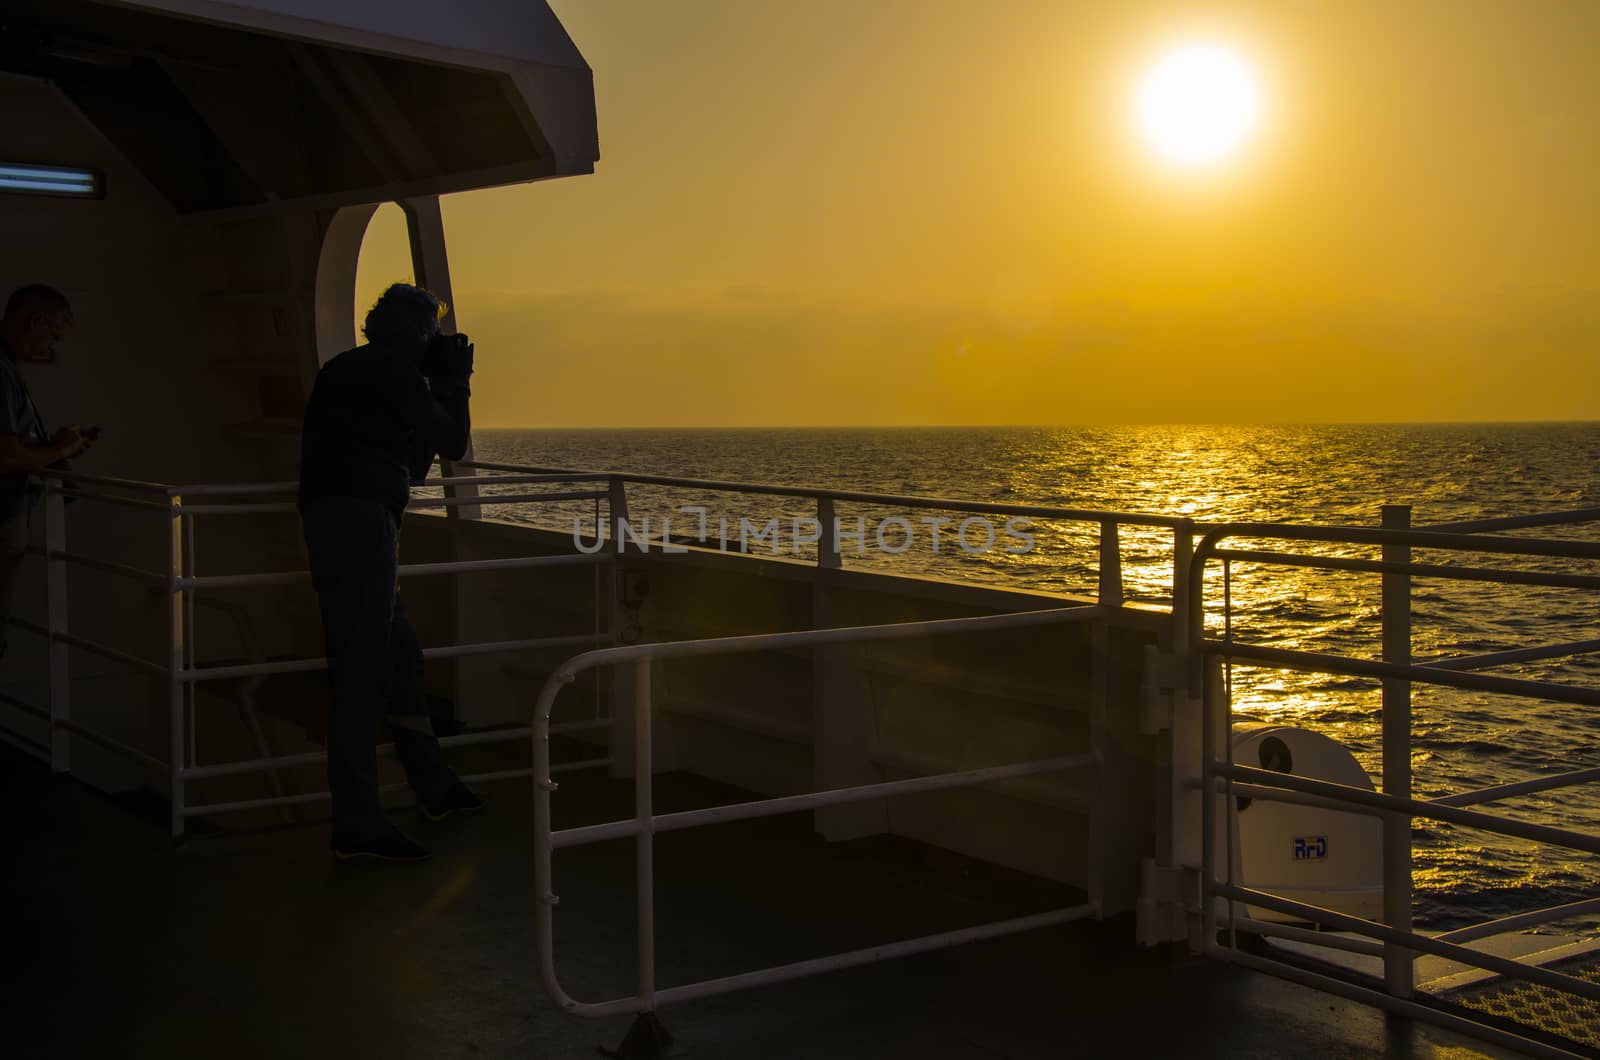 Sunset in the aegean sea from a boat. by MAEKFOTO